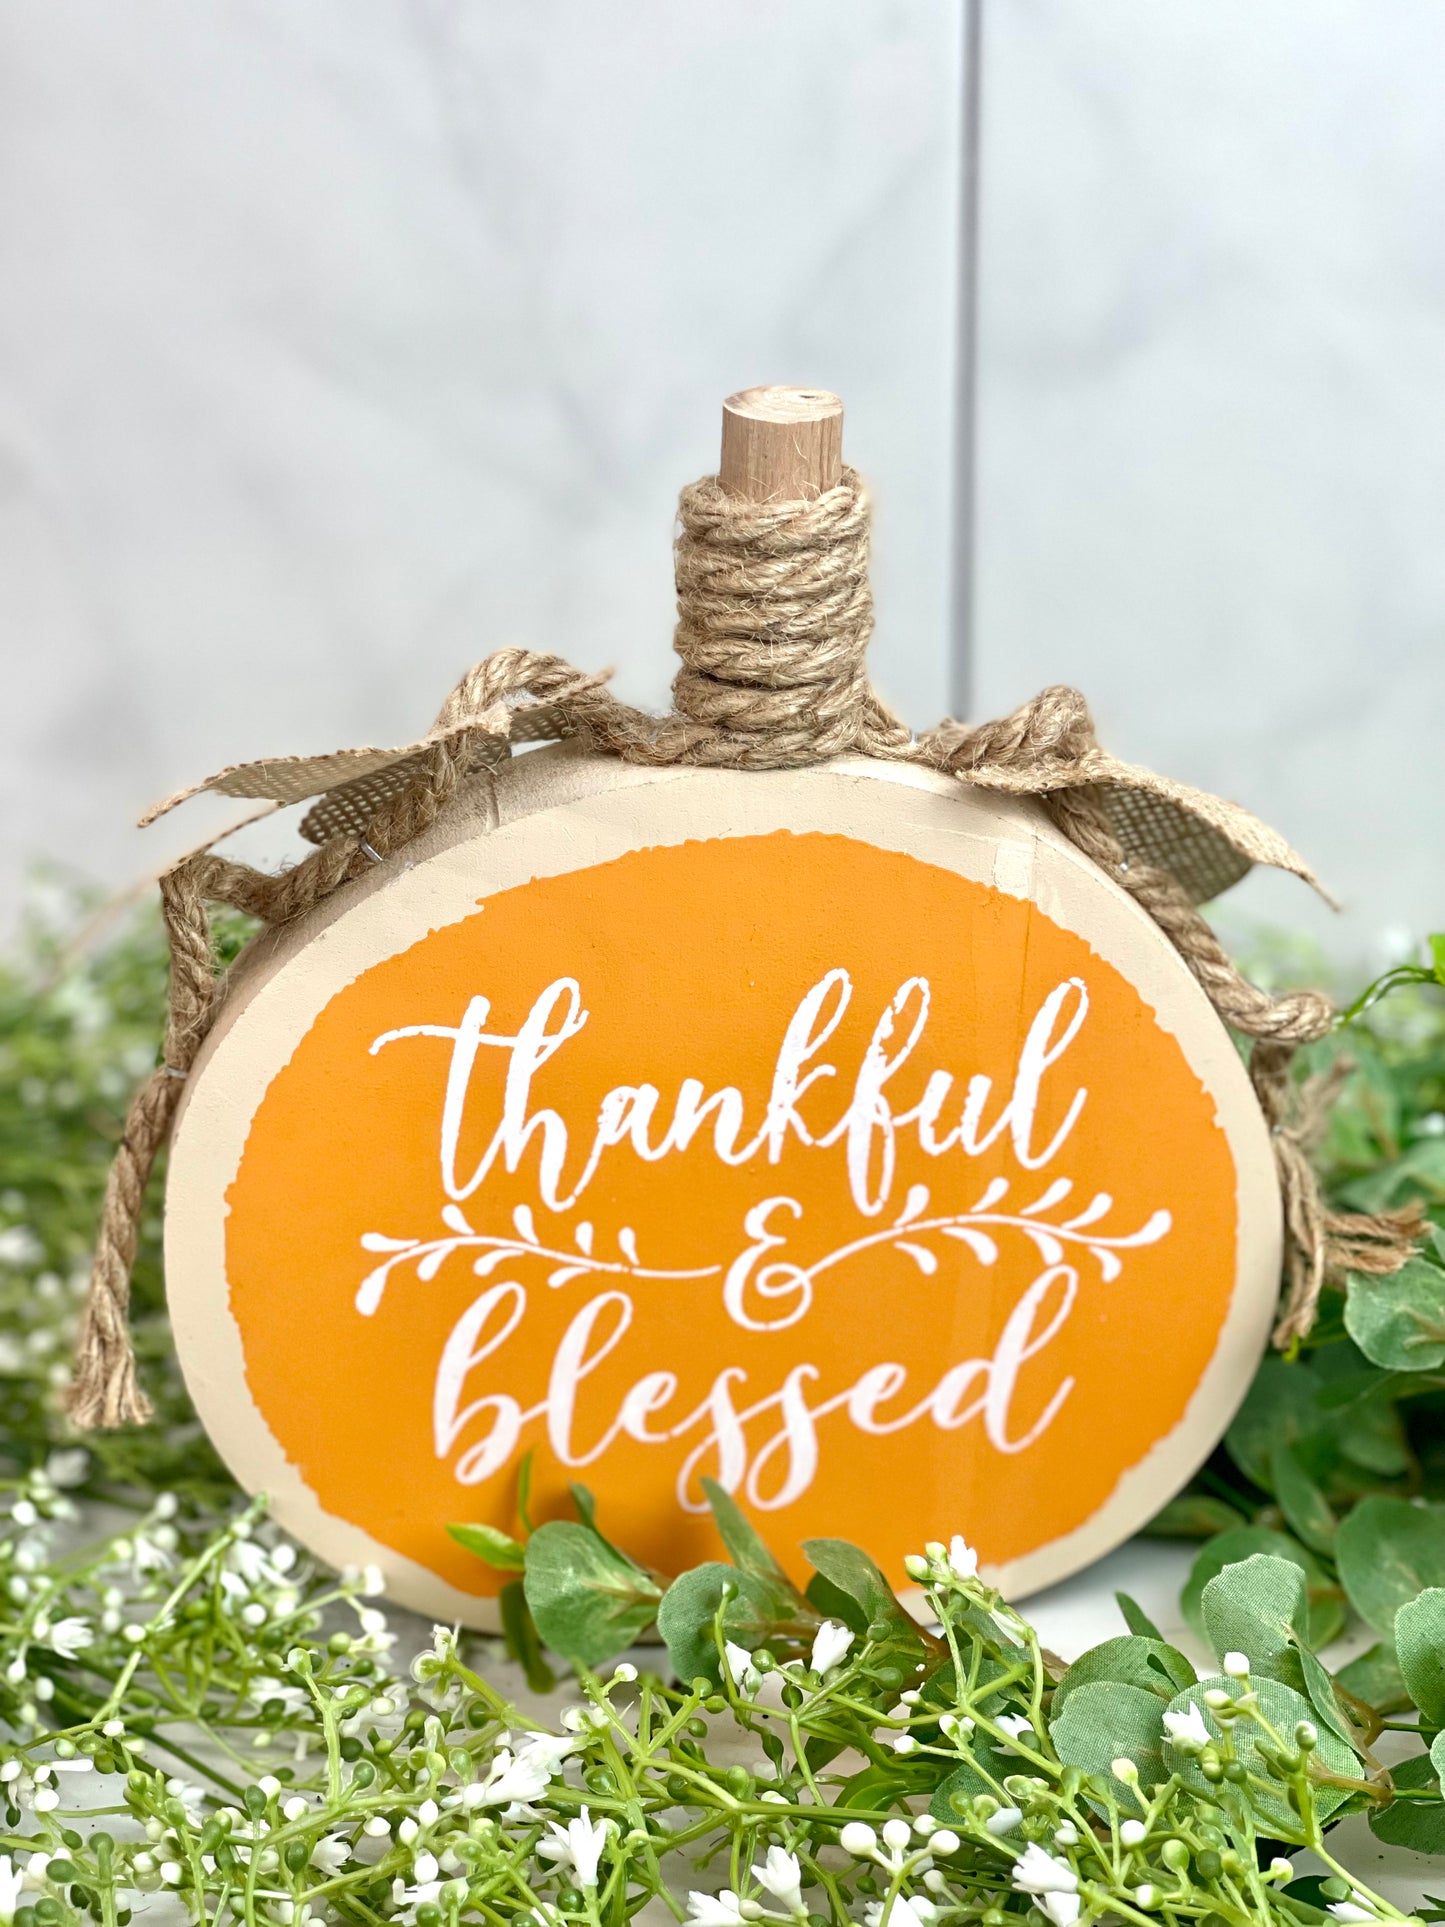 Thankful and Blessed Round Sitting Pumpkin